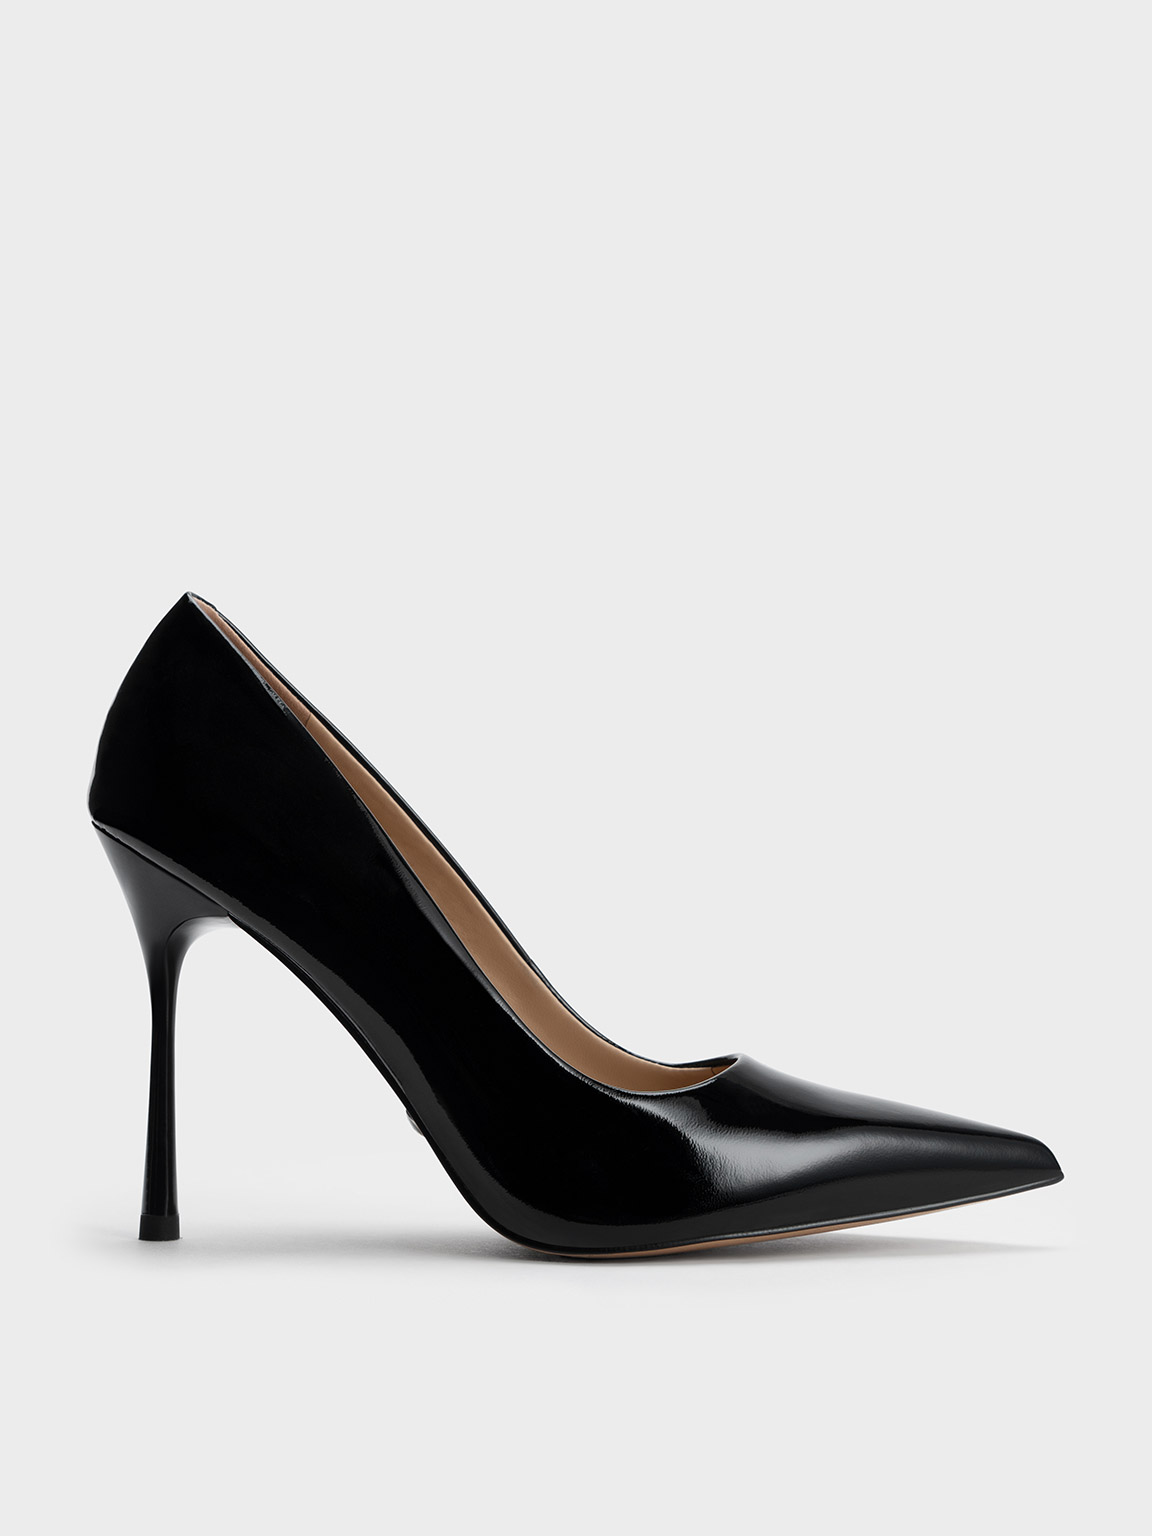 Kyra Patent Leather Pumps